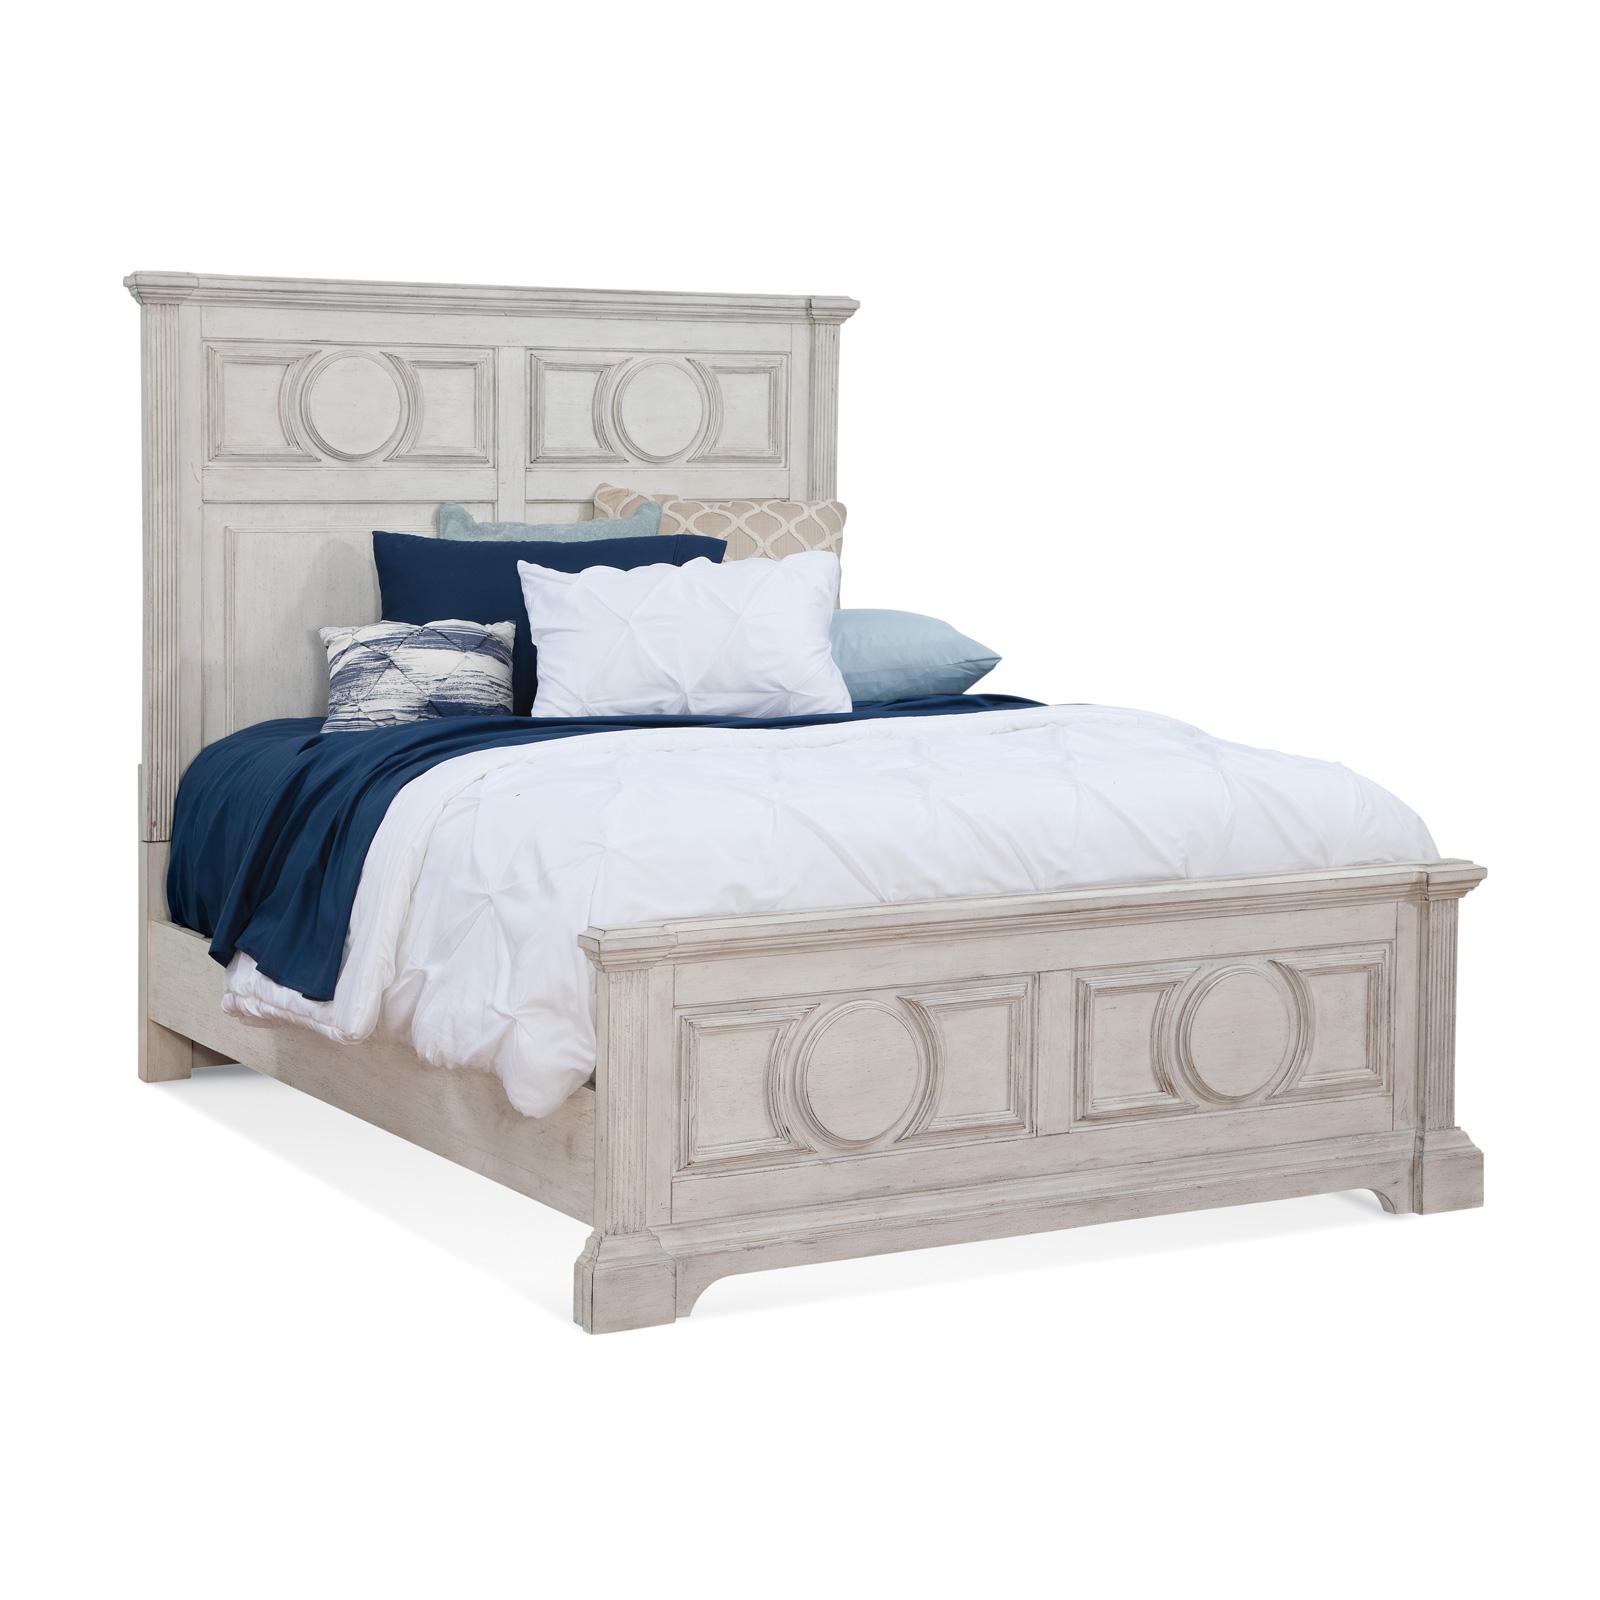 Cottage Panel Bed BRIGHTEN 9410-50PAN in Antique White 